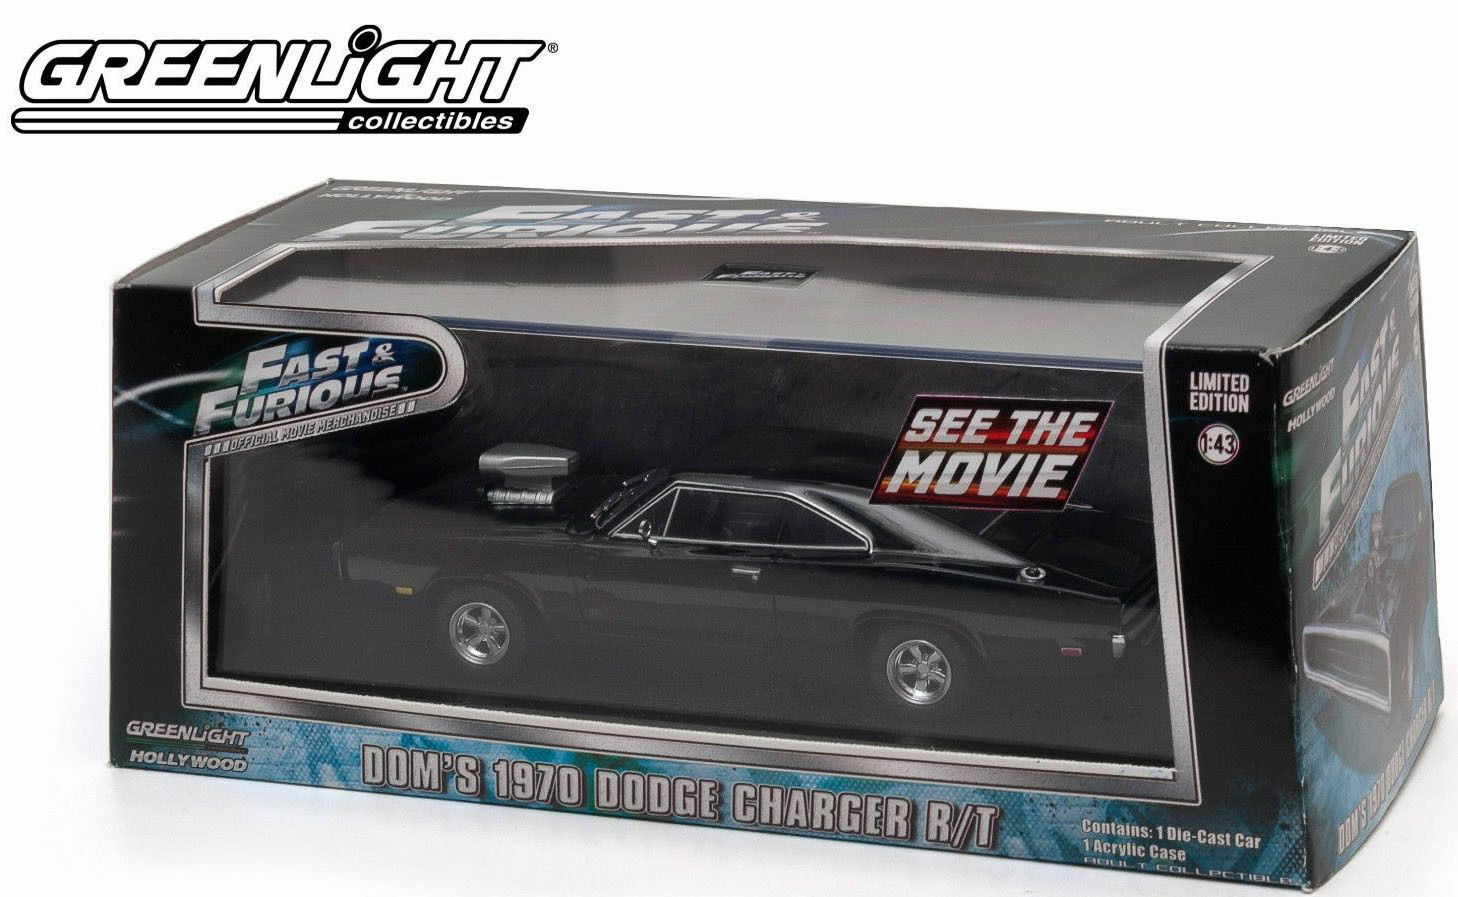 GREENLIGHT DIECAST 1/43 Dom's 1970 Dodge Charger R/T Noir Fast & Furious 86201 